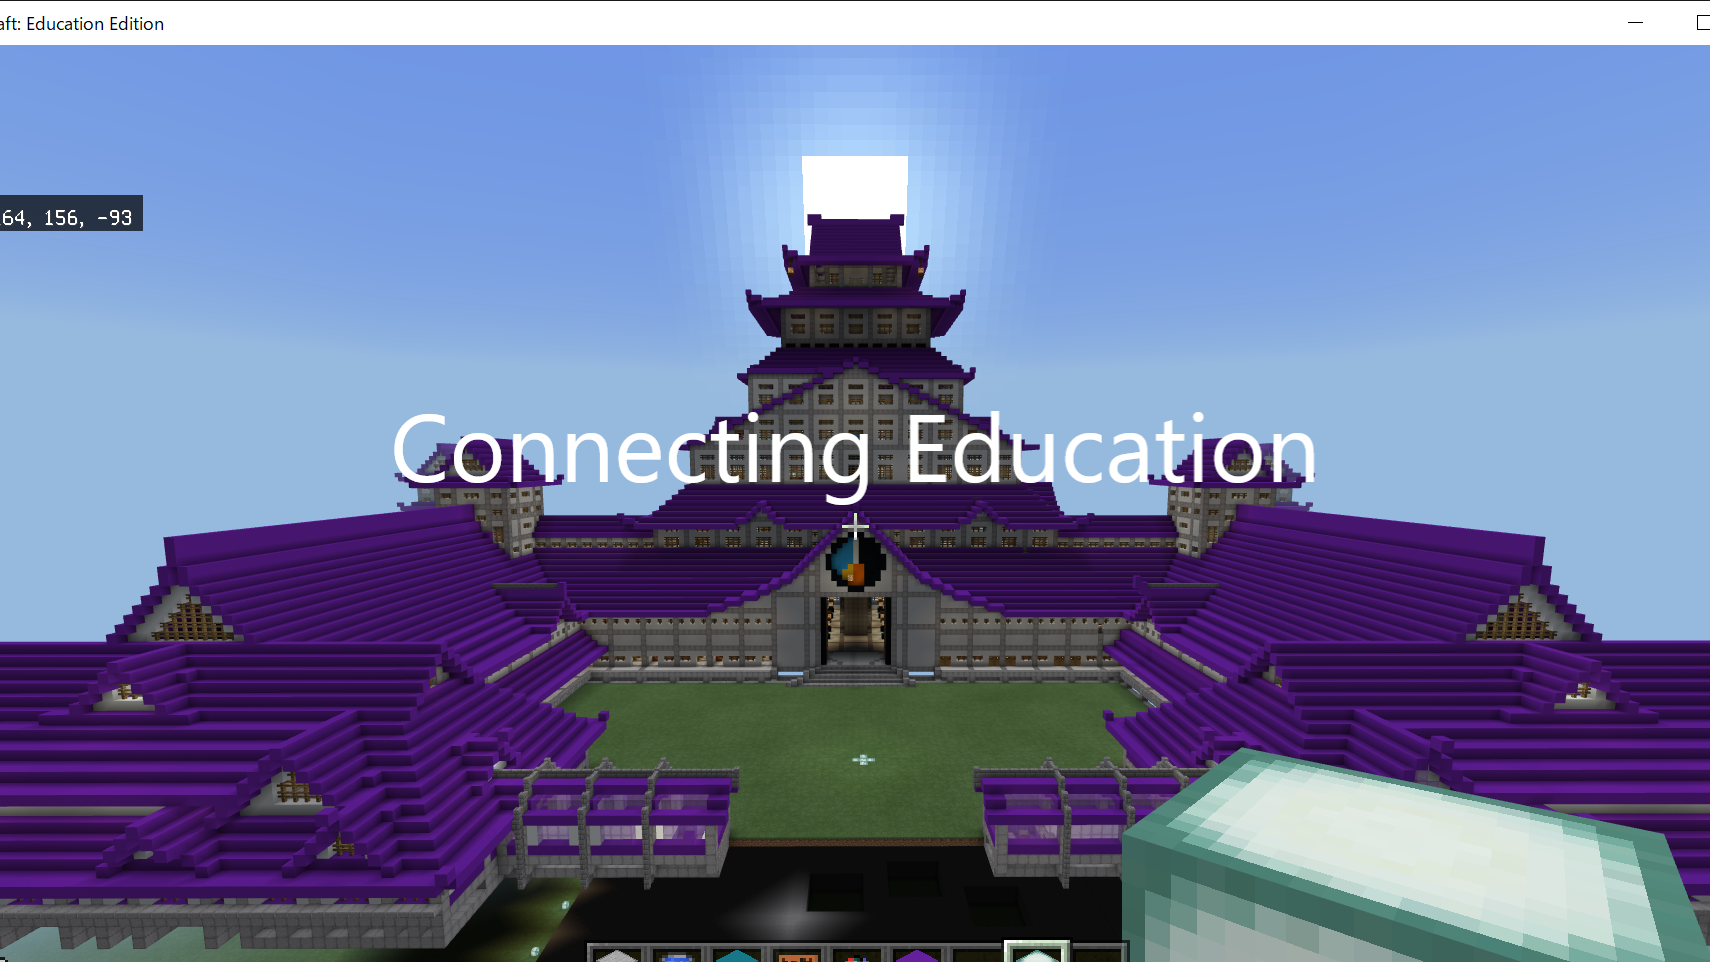 Connecting Education